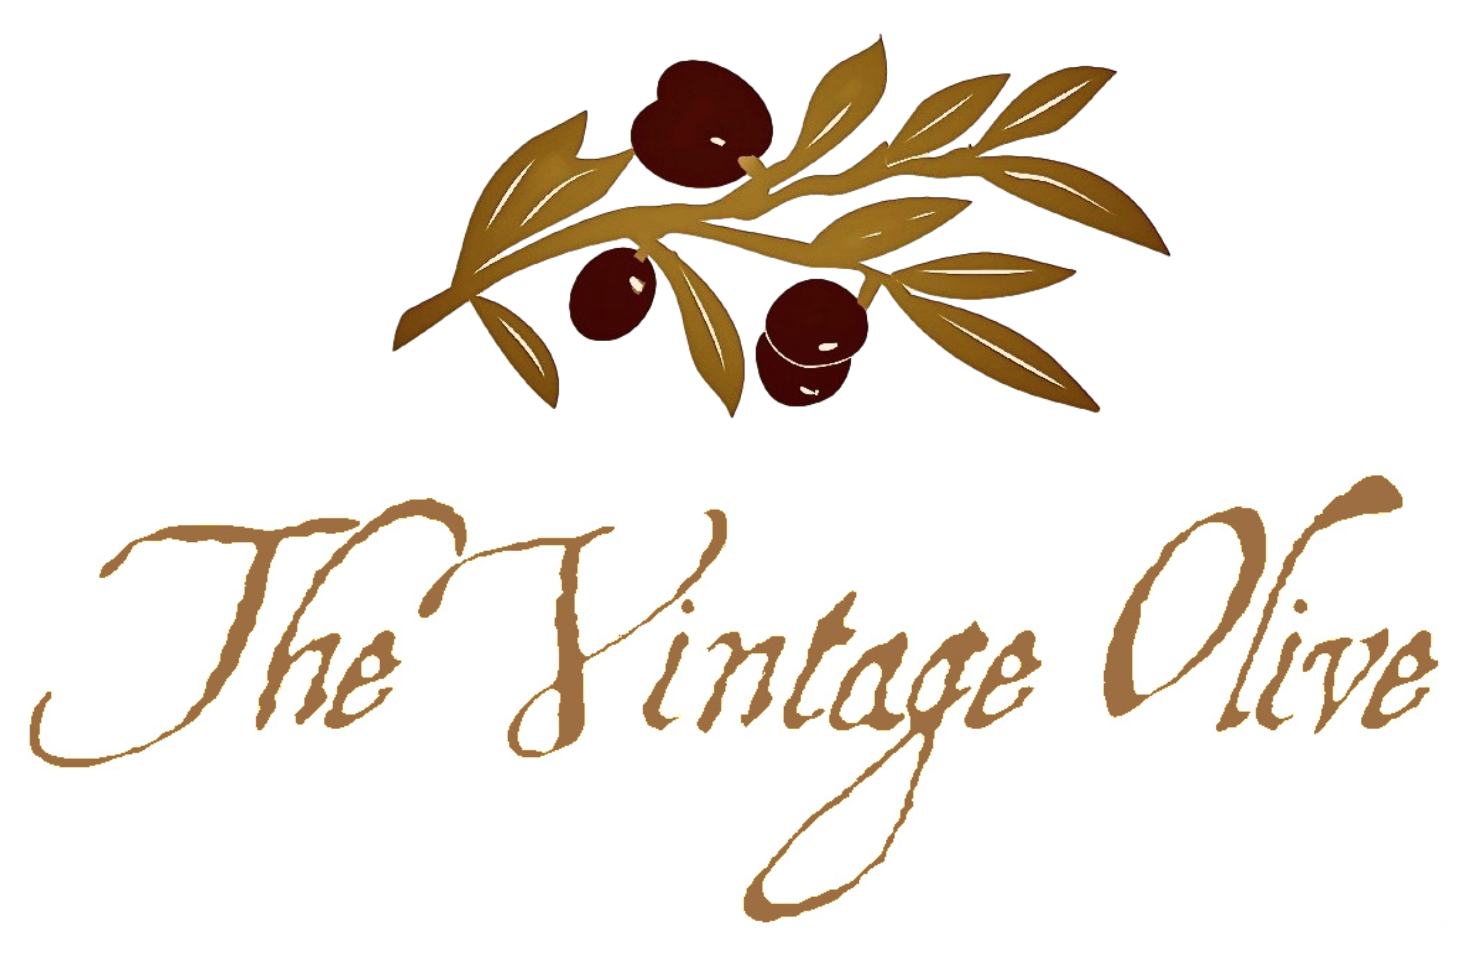 Be sure to stop by The Vintage Olive to enjoy some of our favorite craft blends.